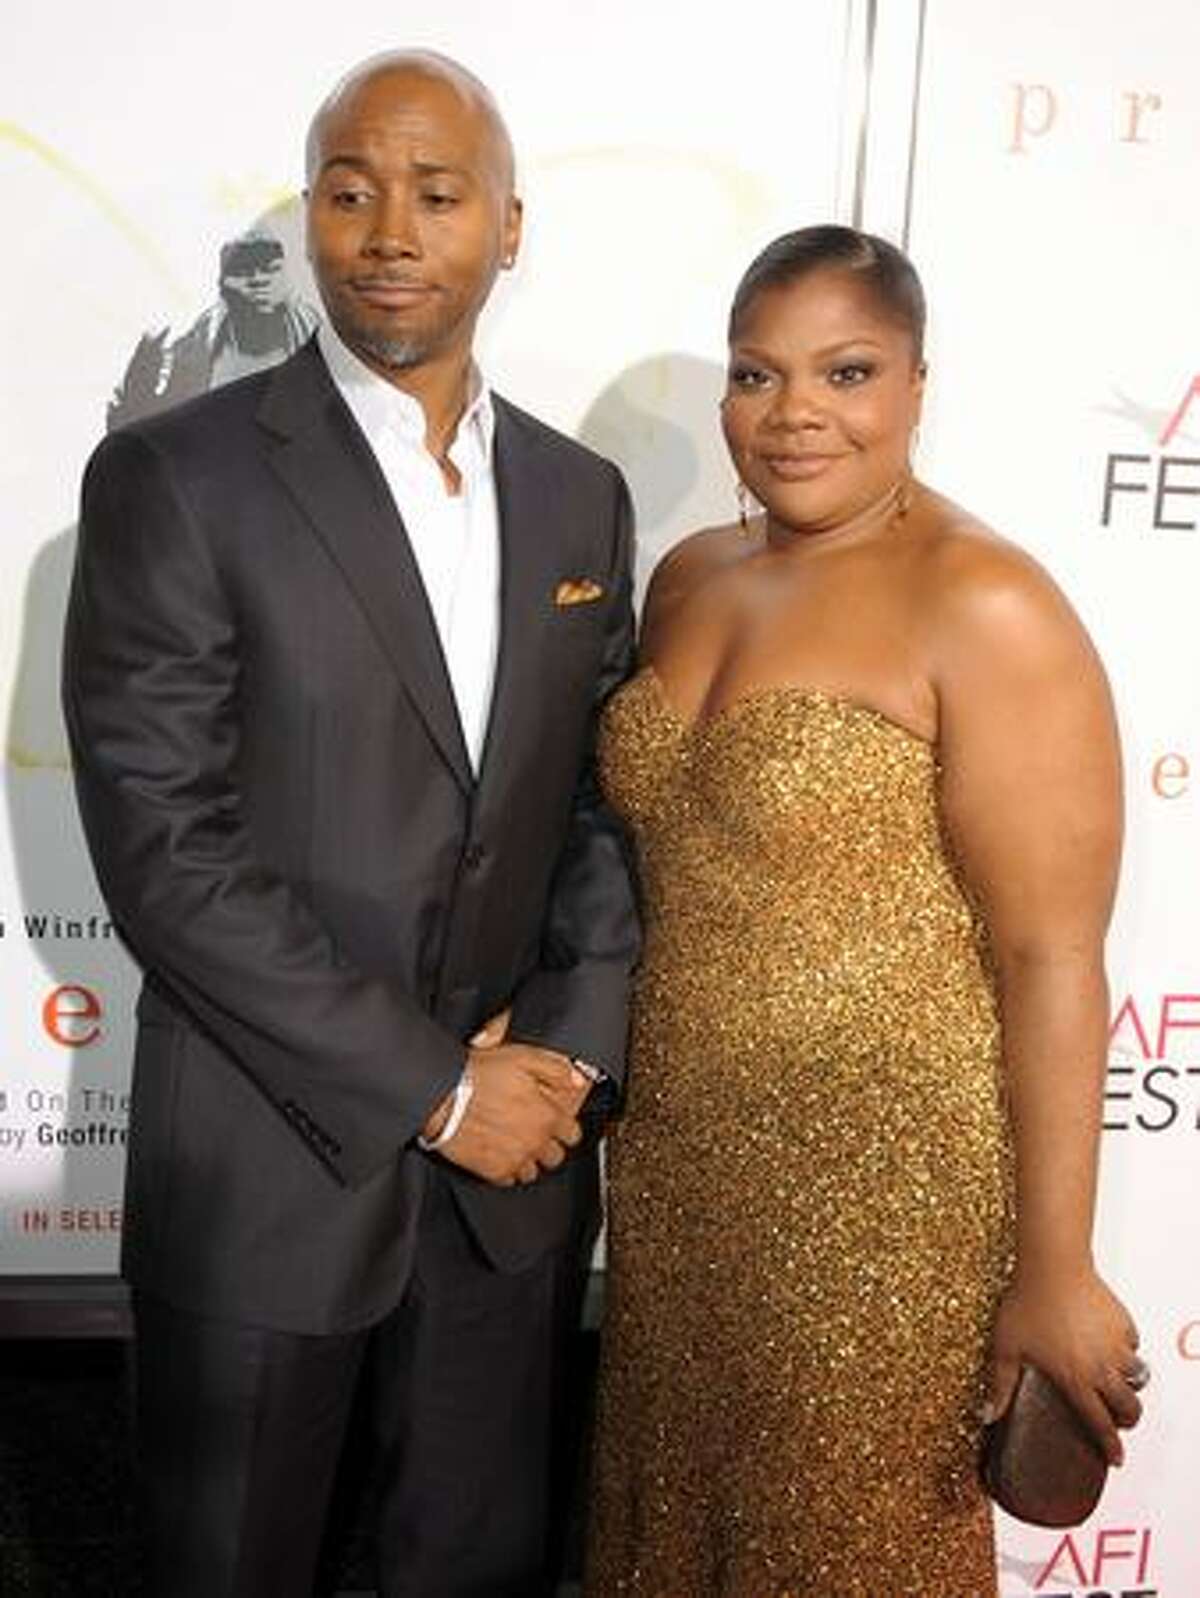 Sidney Hicks (L) and actress Mo'Nique arrive at the screening of "Precious: Based On The Novel 'PUSH' By Sapphire" during AFI FEST 2009 held at Grauman's Chinese Theatre in Hollywood, California.